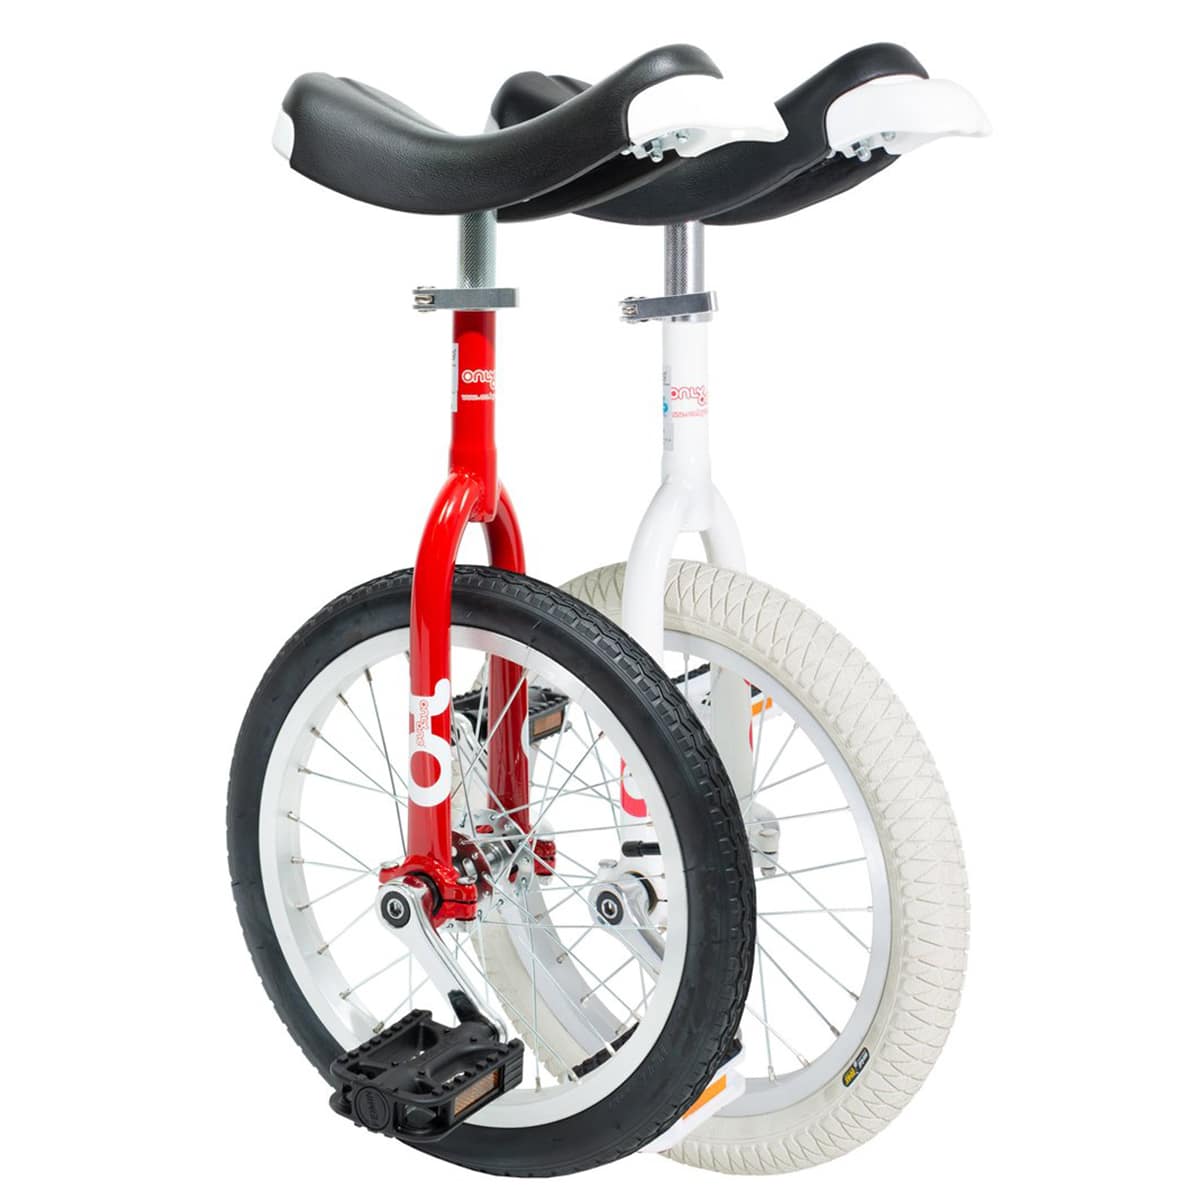 onlyone-unicycle-305-mm-16-red_1